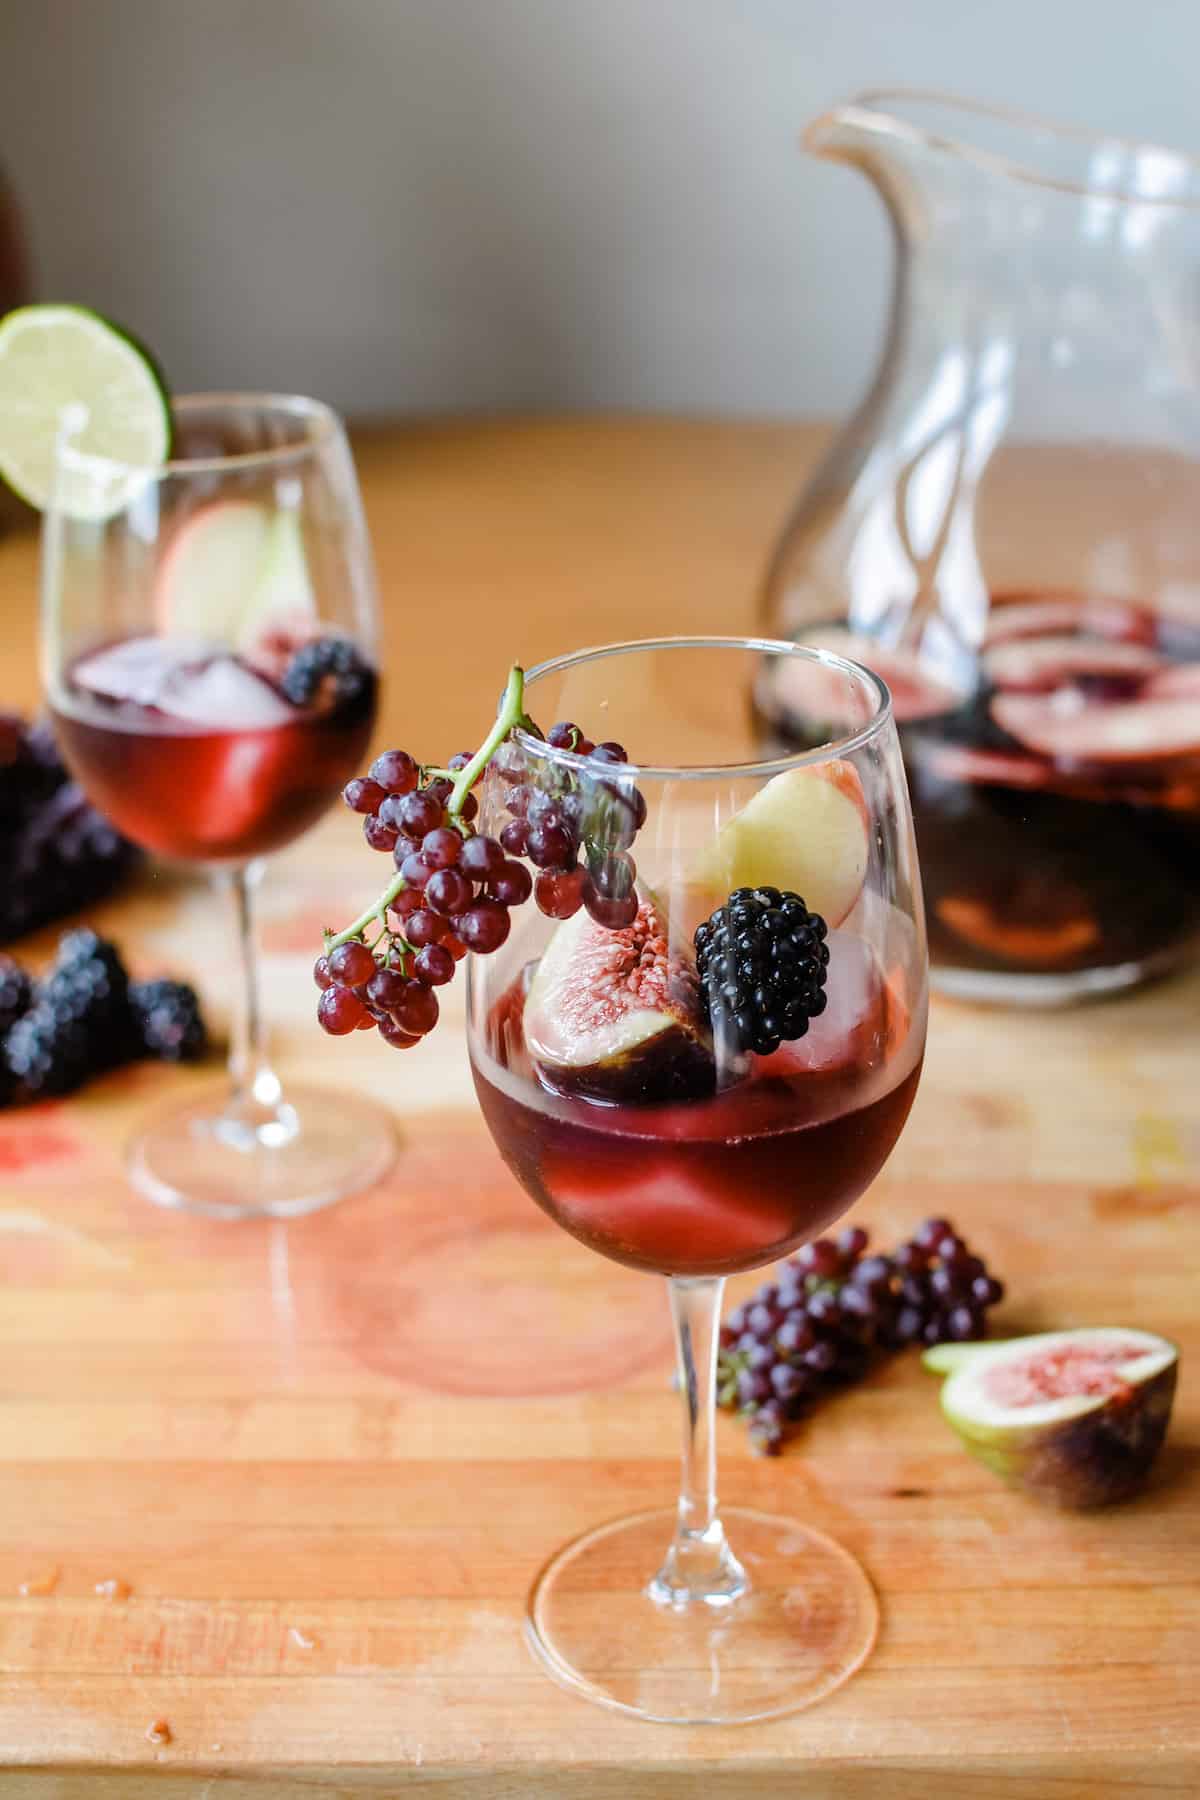 This Fall Sangria is like the California wine harvest in a glass: Champagne grapes, Mission figs, crisp apples, and blackberries mixed with luscious Merlot. #sangria #winecocktails #redwinesangria #fallsangria